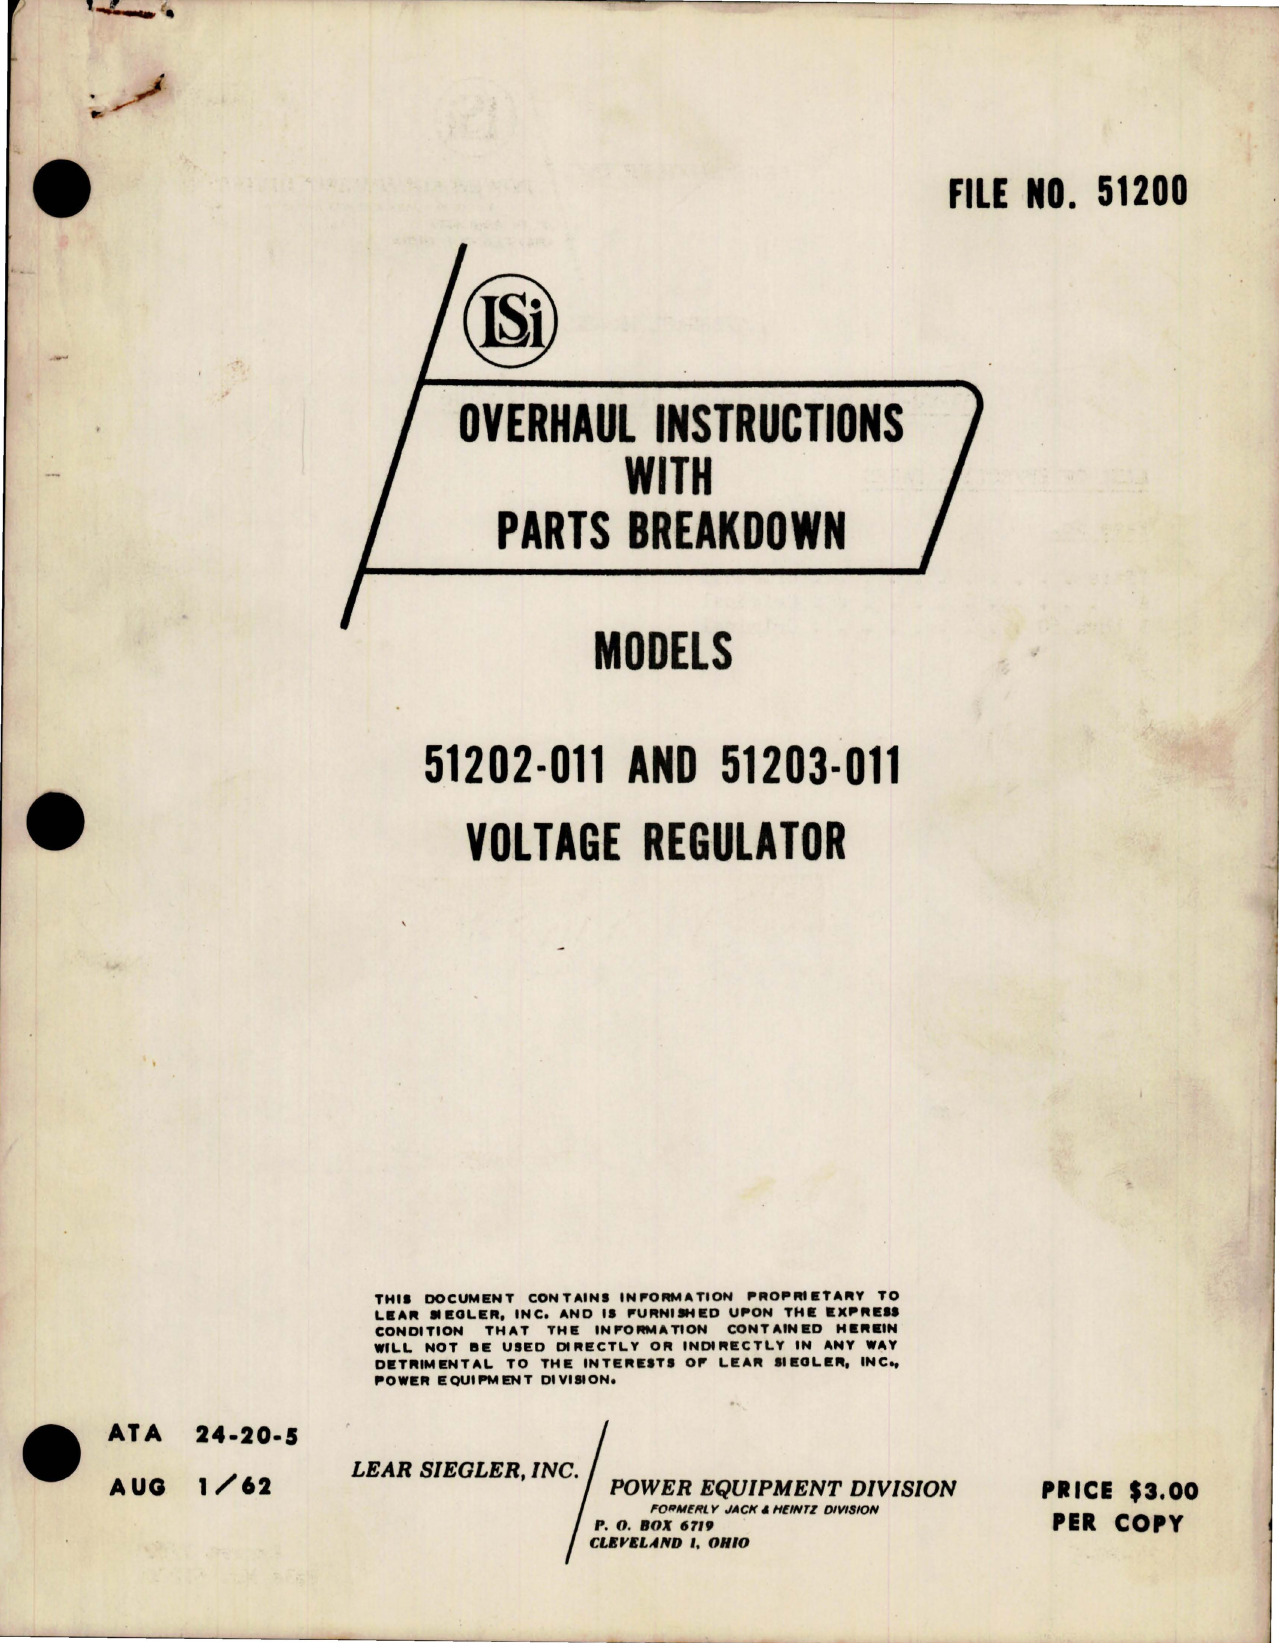 Sample page 1 from AirCorps Library document: Overhaul Instructions with Parts Breakdown for Voltage Regulator - Models 51202-011 and 51203-011 